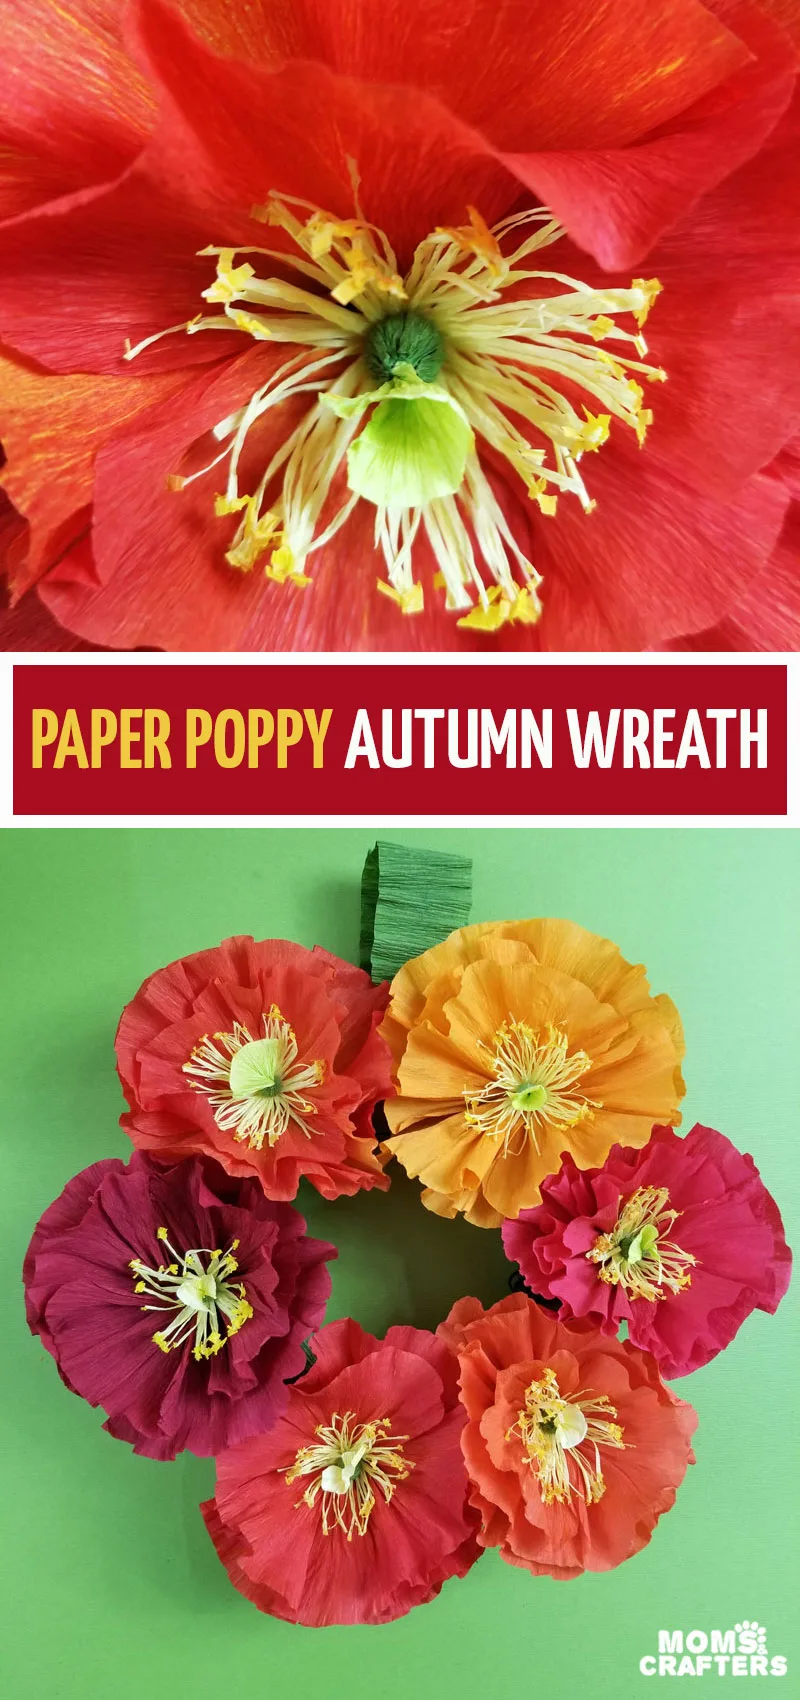 Click to learn how to make a stunning crepe paper flower wreath using an Icelandic Poppy template! You can make it for fall and autumn decor in rich reds, yellows, and oranges, or make it in Christmas colors as a Christmas wreath. 